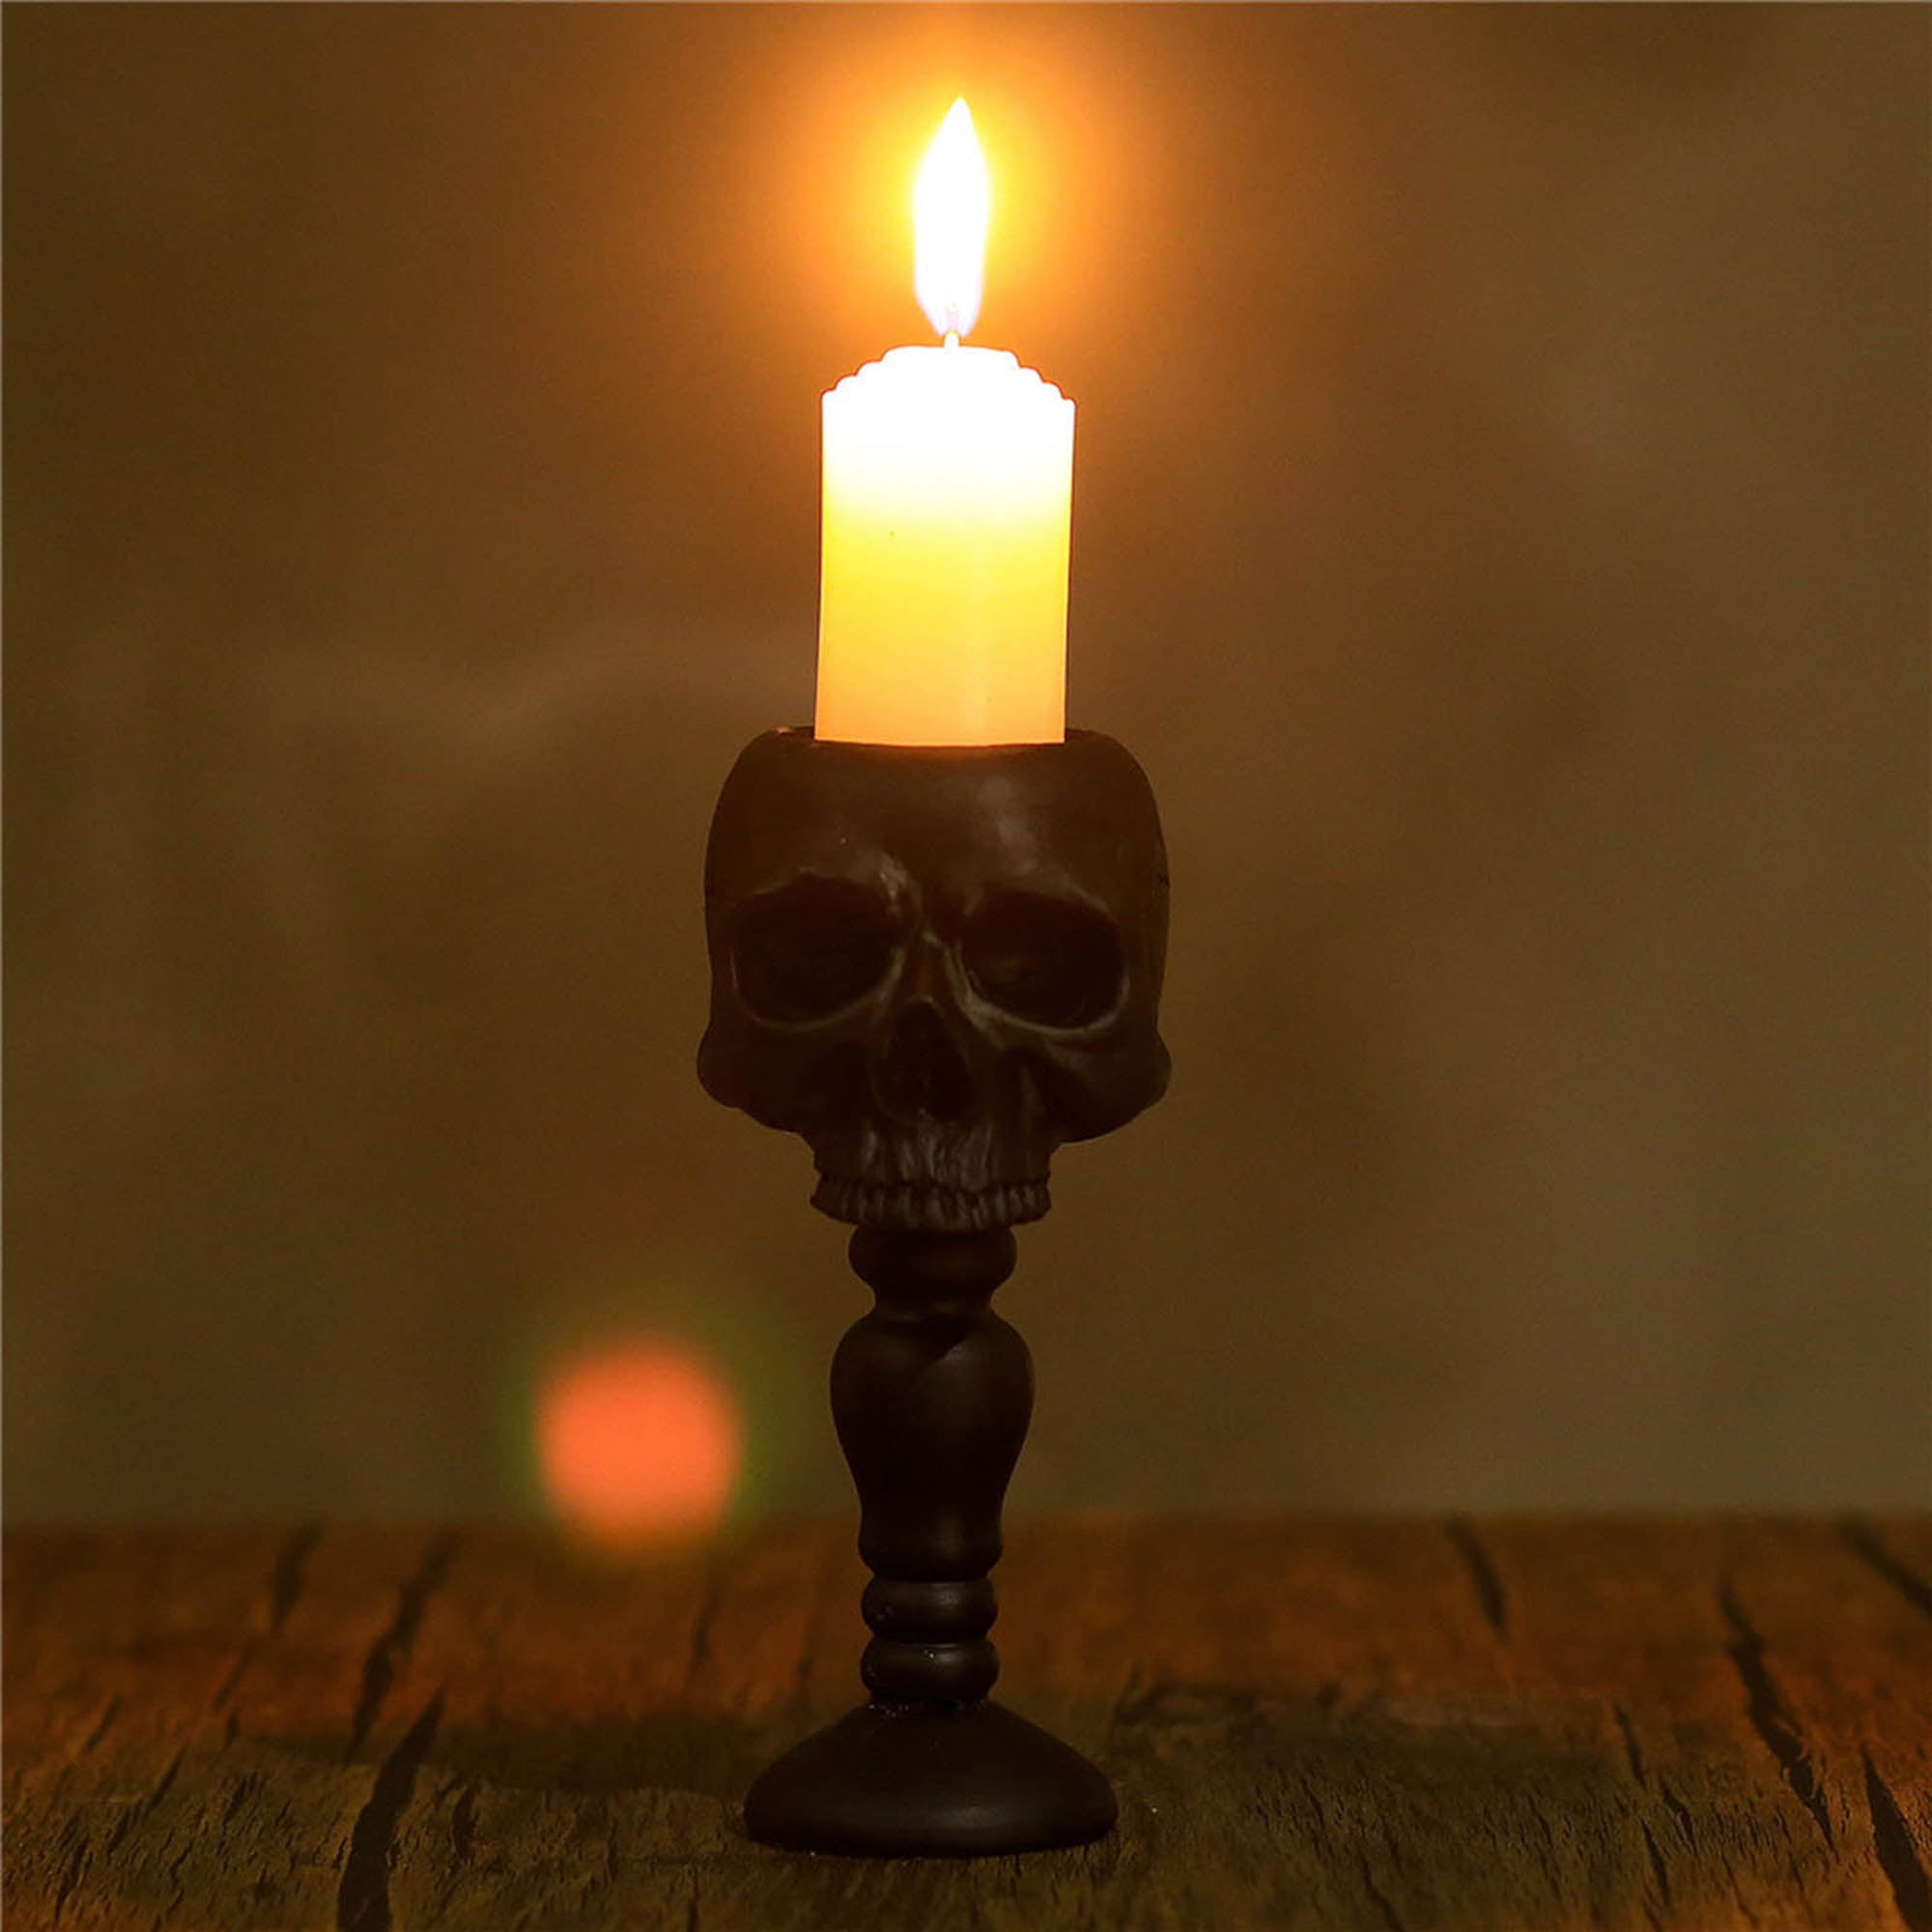 MTLEE 5 Pieces 4.3 Halloween Skull Candle Large Skull Figure Image Candle  Gothic Horror Novelty Decor for Spell Ritual Witch Fireplace Home